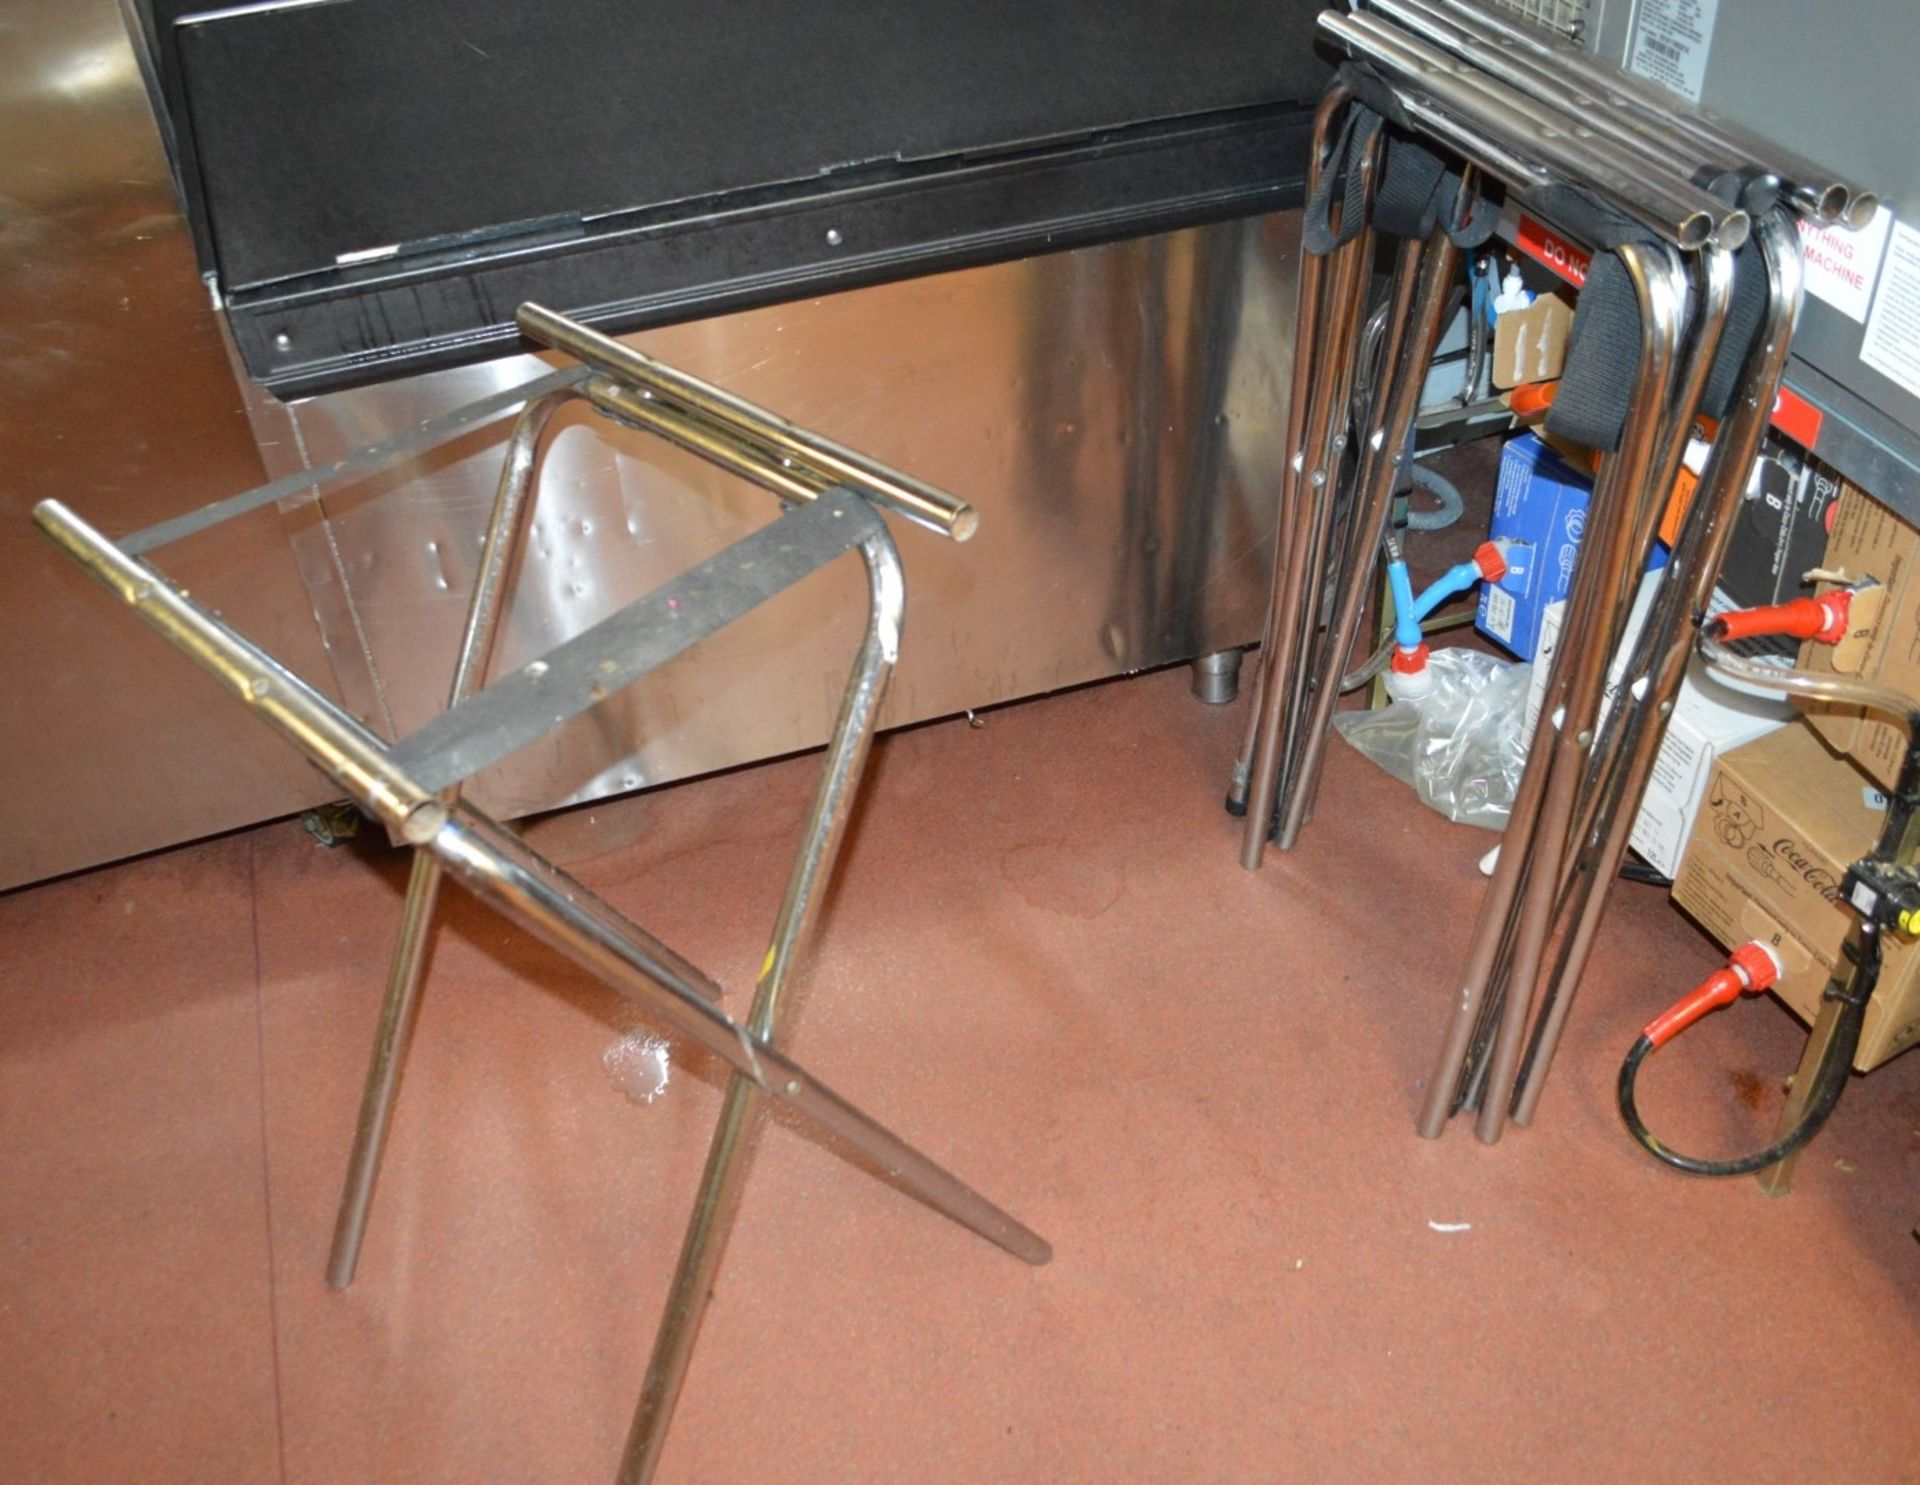 7 x Chrome Food Tray Stands With Food Trays - CL357 - Location: Bolton BL6 This lot will incur a - Image 2 of 3